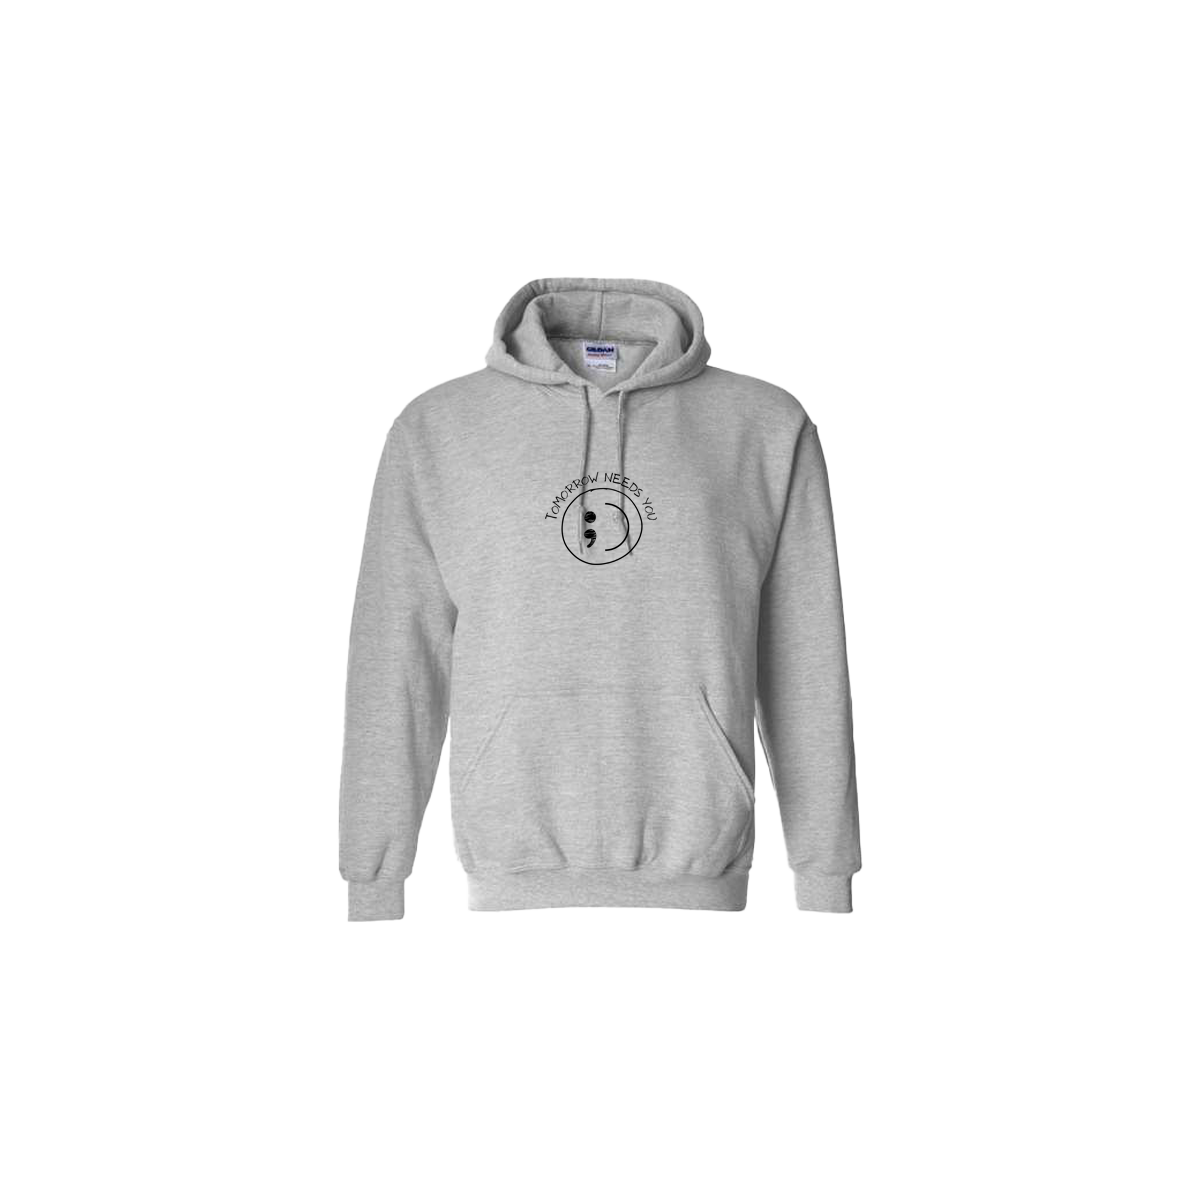 Tomorrow Needs You Embroidered Grey Hoodie - Mental Health Awareness Clothing